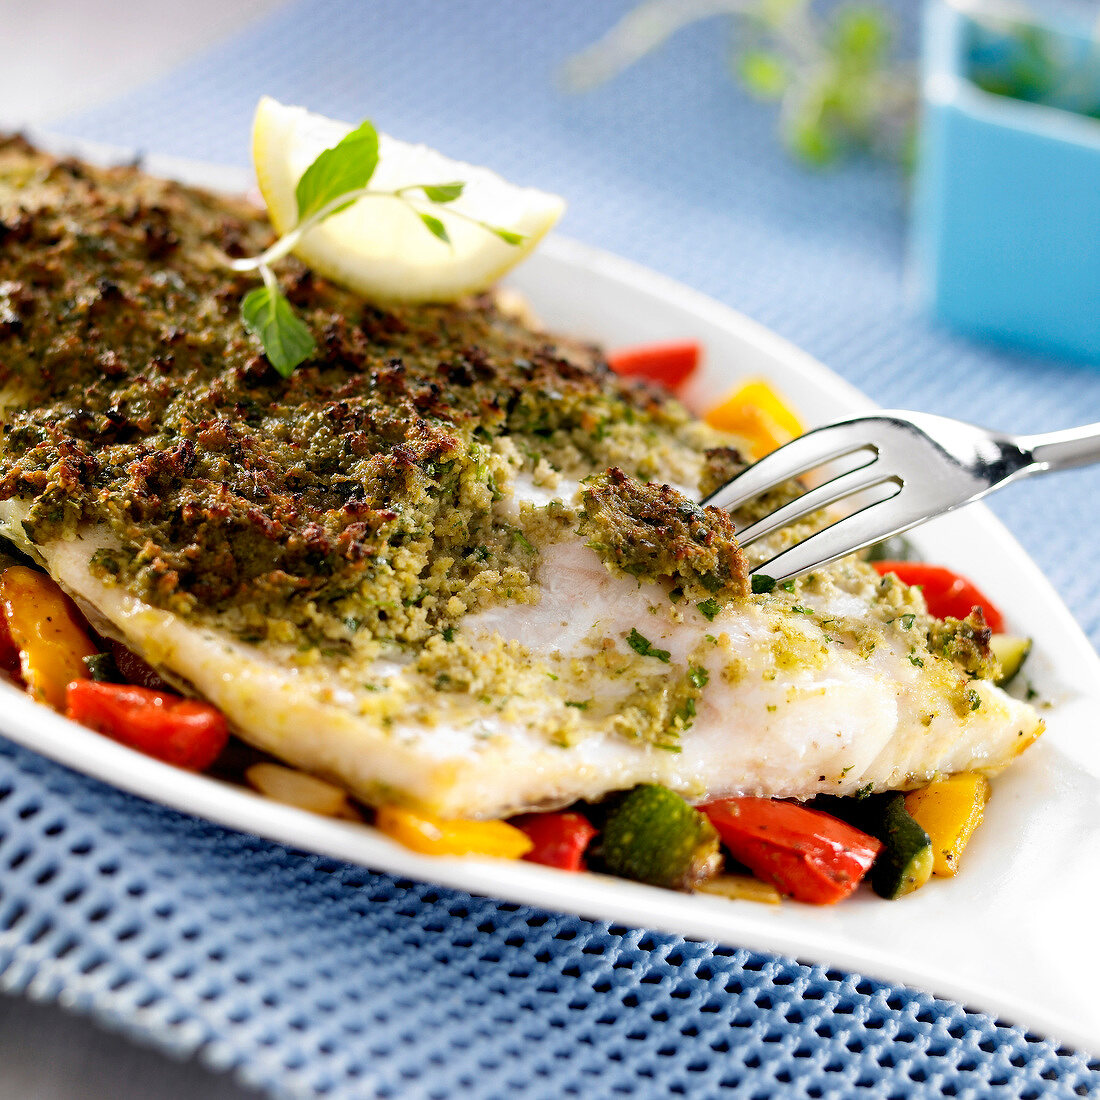 Perch fillet in basil crust with southern vegetables